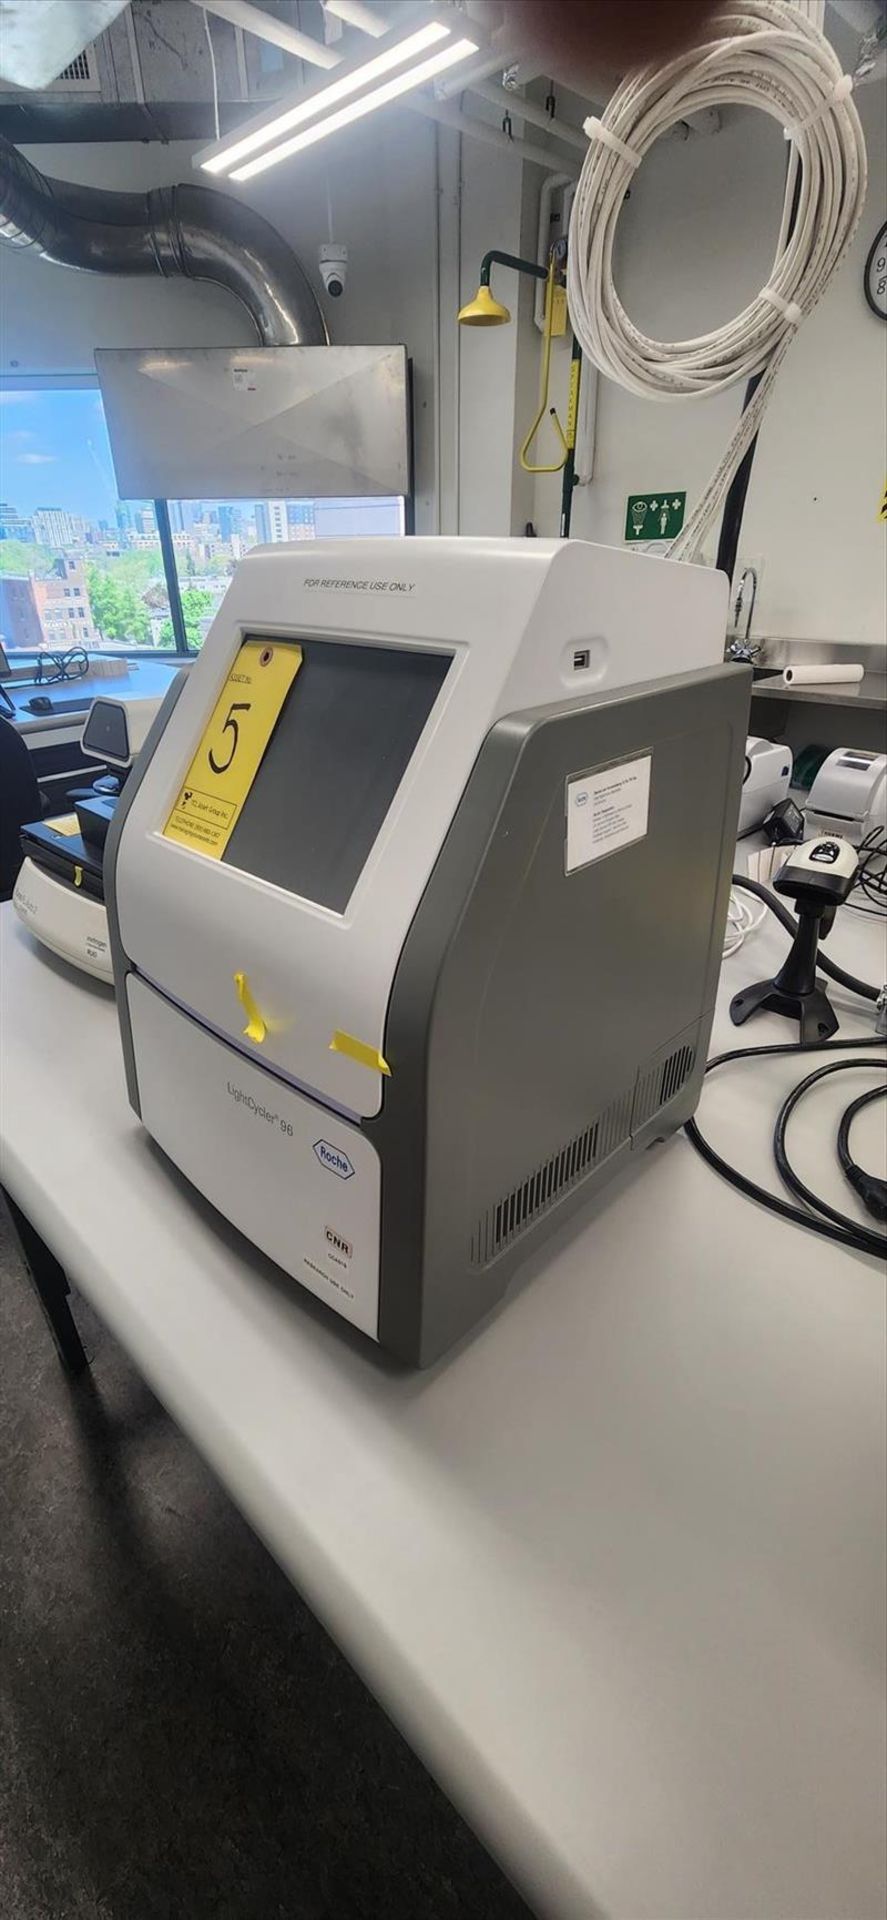 Roche LightCycler 96 Real-Time PCR Instrument, S/N 12383 - Image 2 of 3